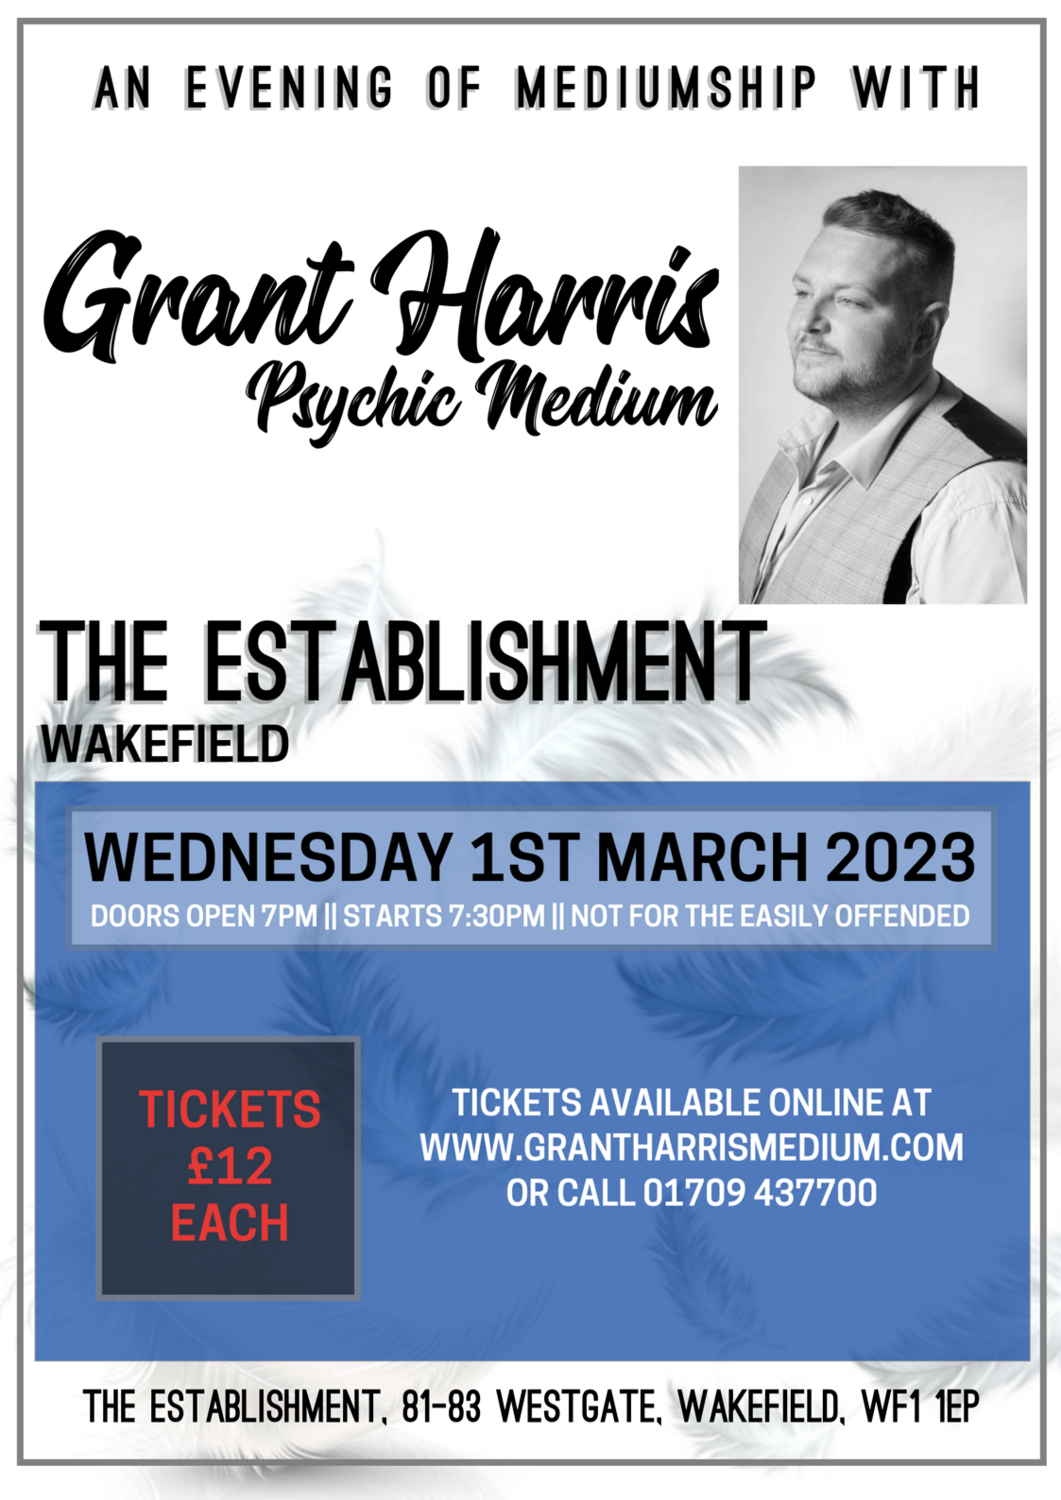 The Establishment, Wakefield, Wed 1st March 2023